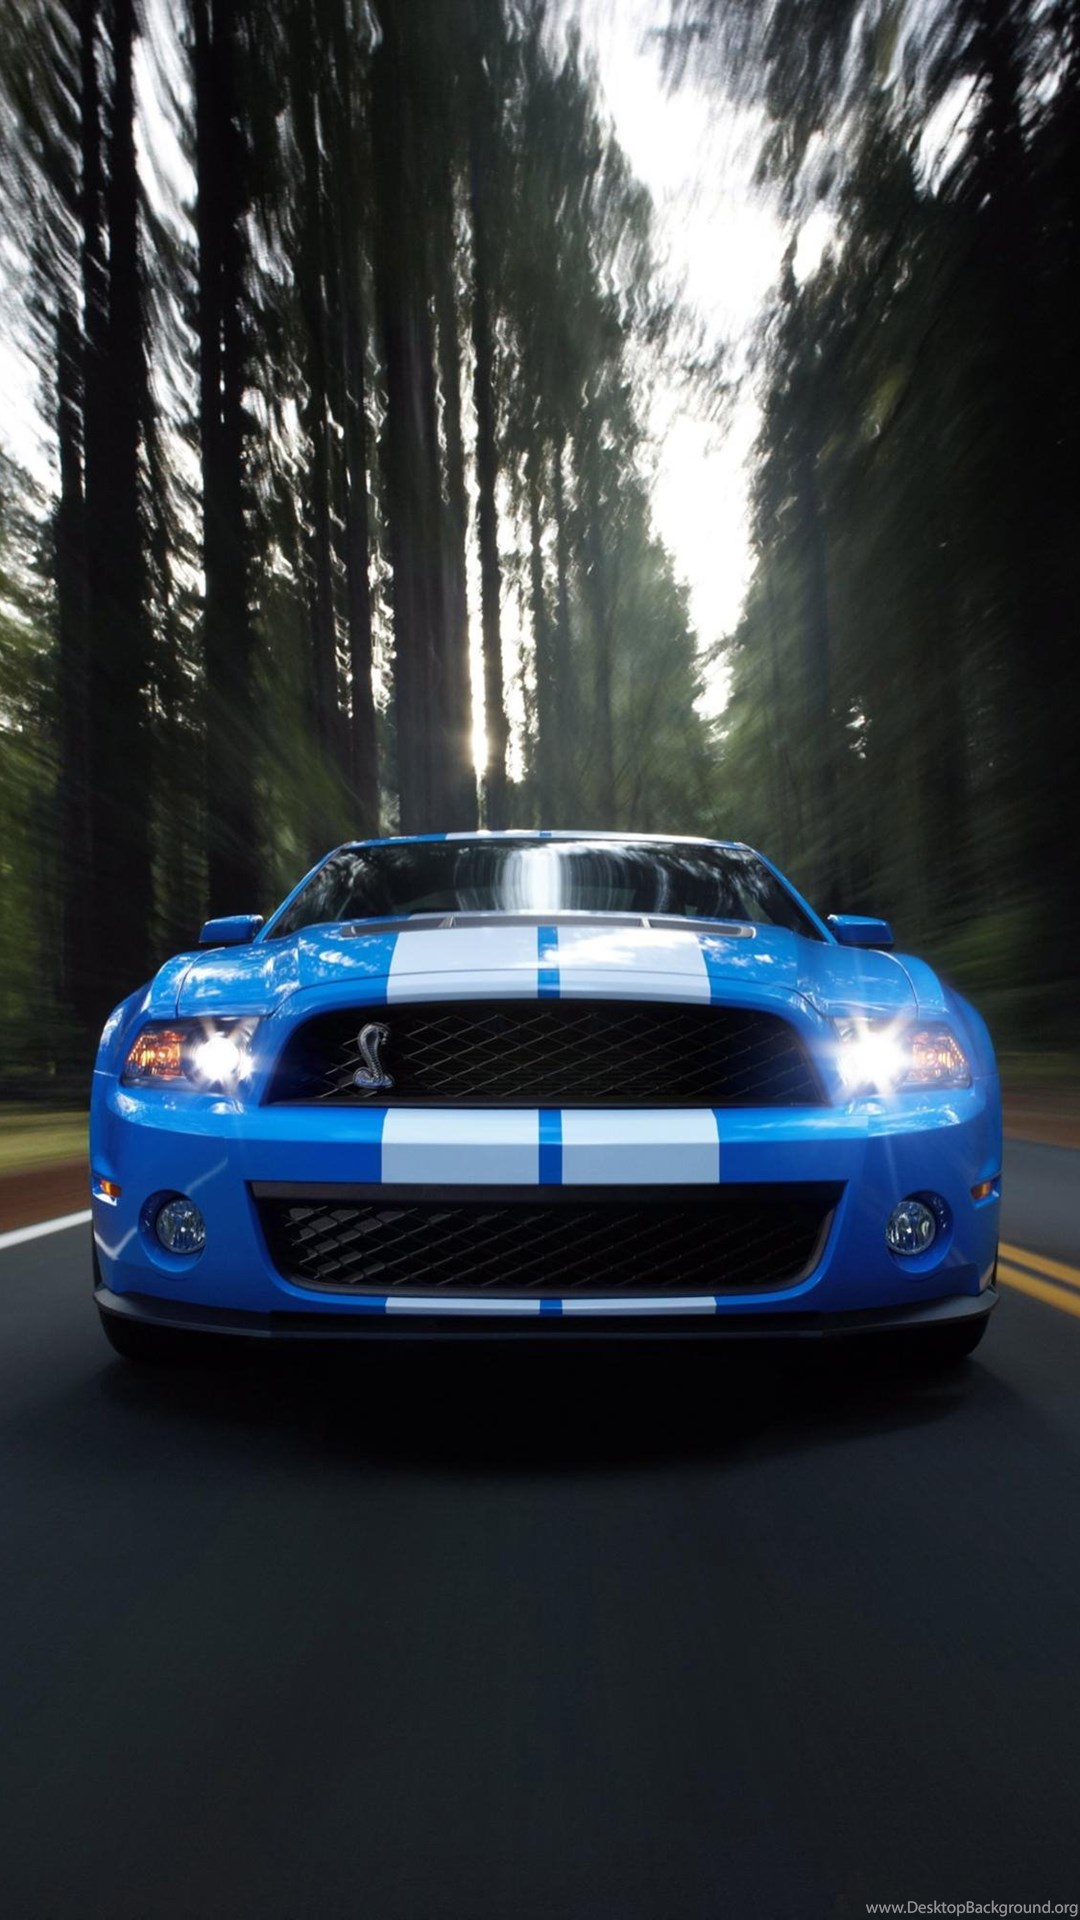 Фото машин вертикально. Ford Shelby gt500. Mustang Shelby gt500. Форд Шелби gt 500. Ford Mustang Shelby.